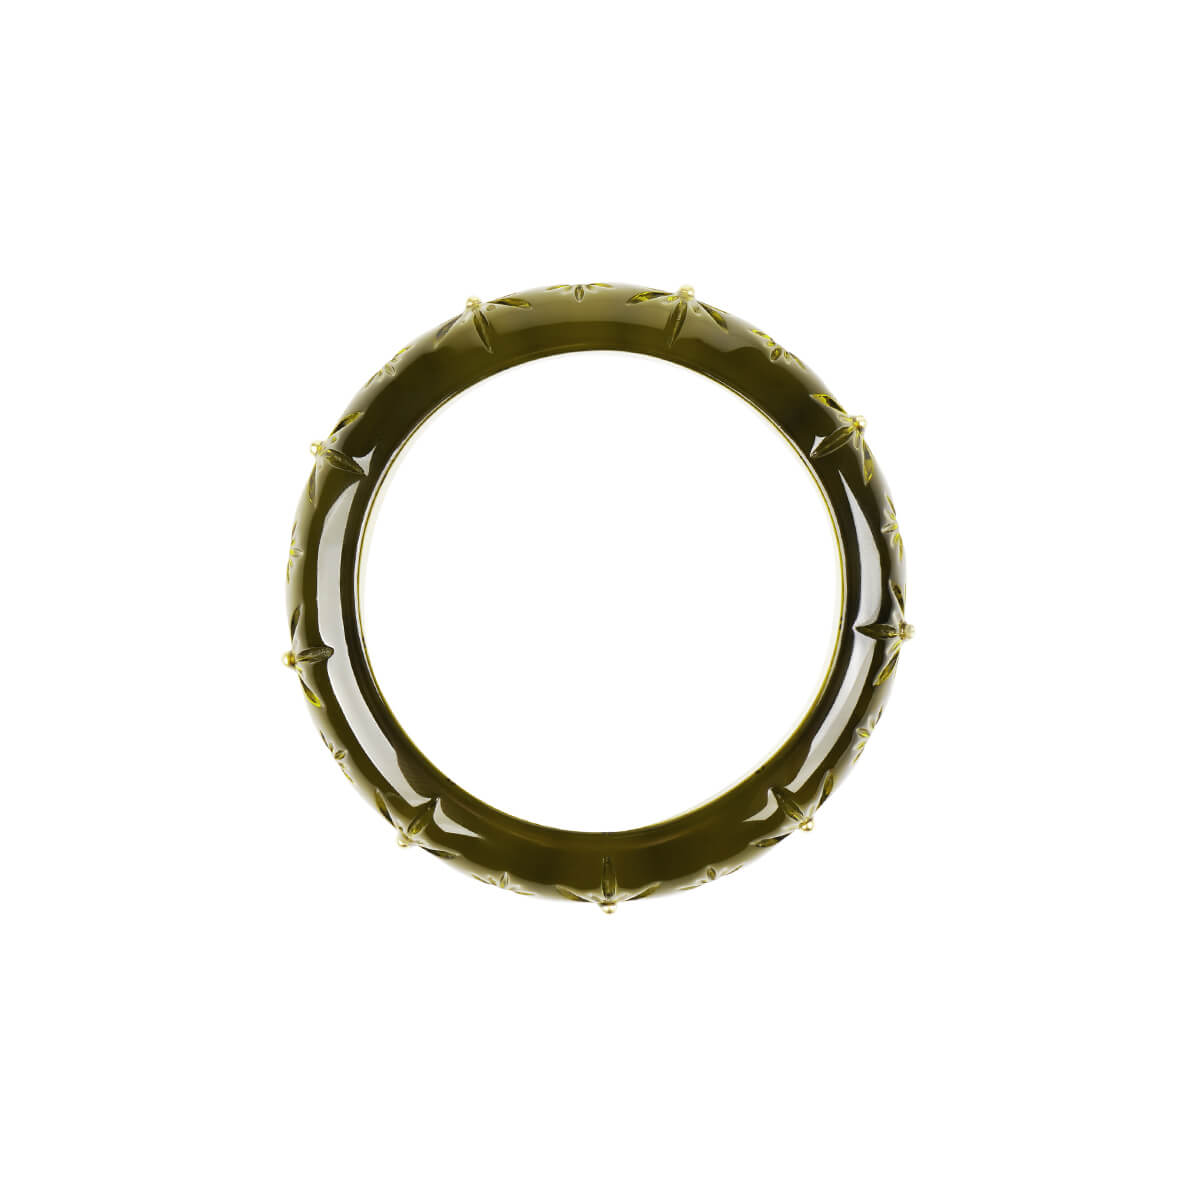 NEW IN Studded Crystal Bangle Olive